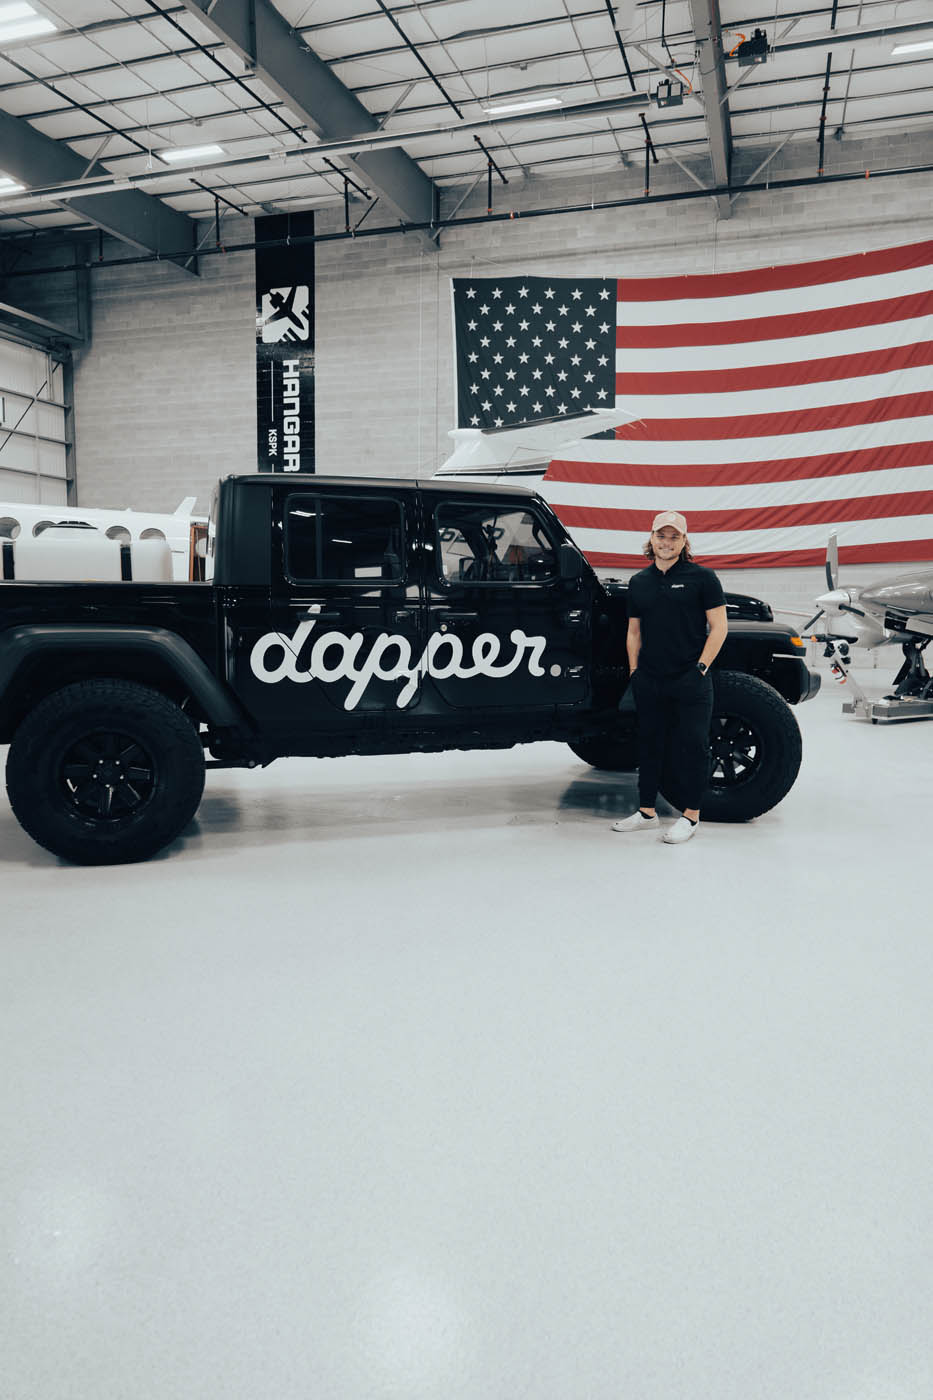 Dapper Pros owner standing in front of the Dapper Pros jeep truck.